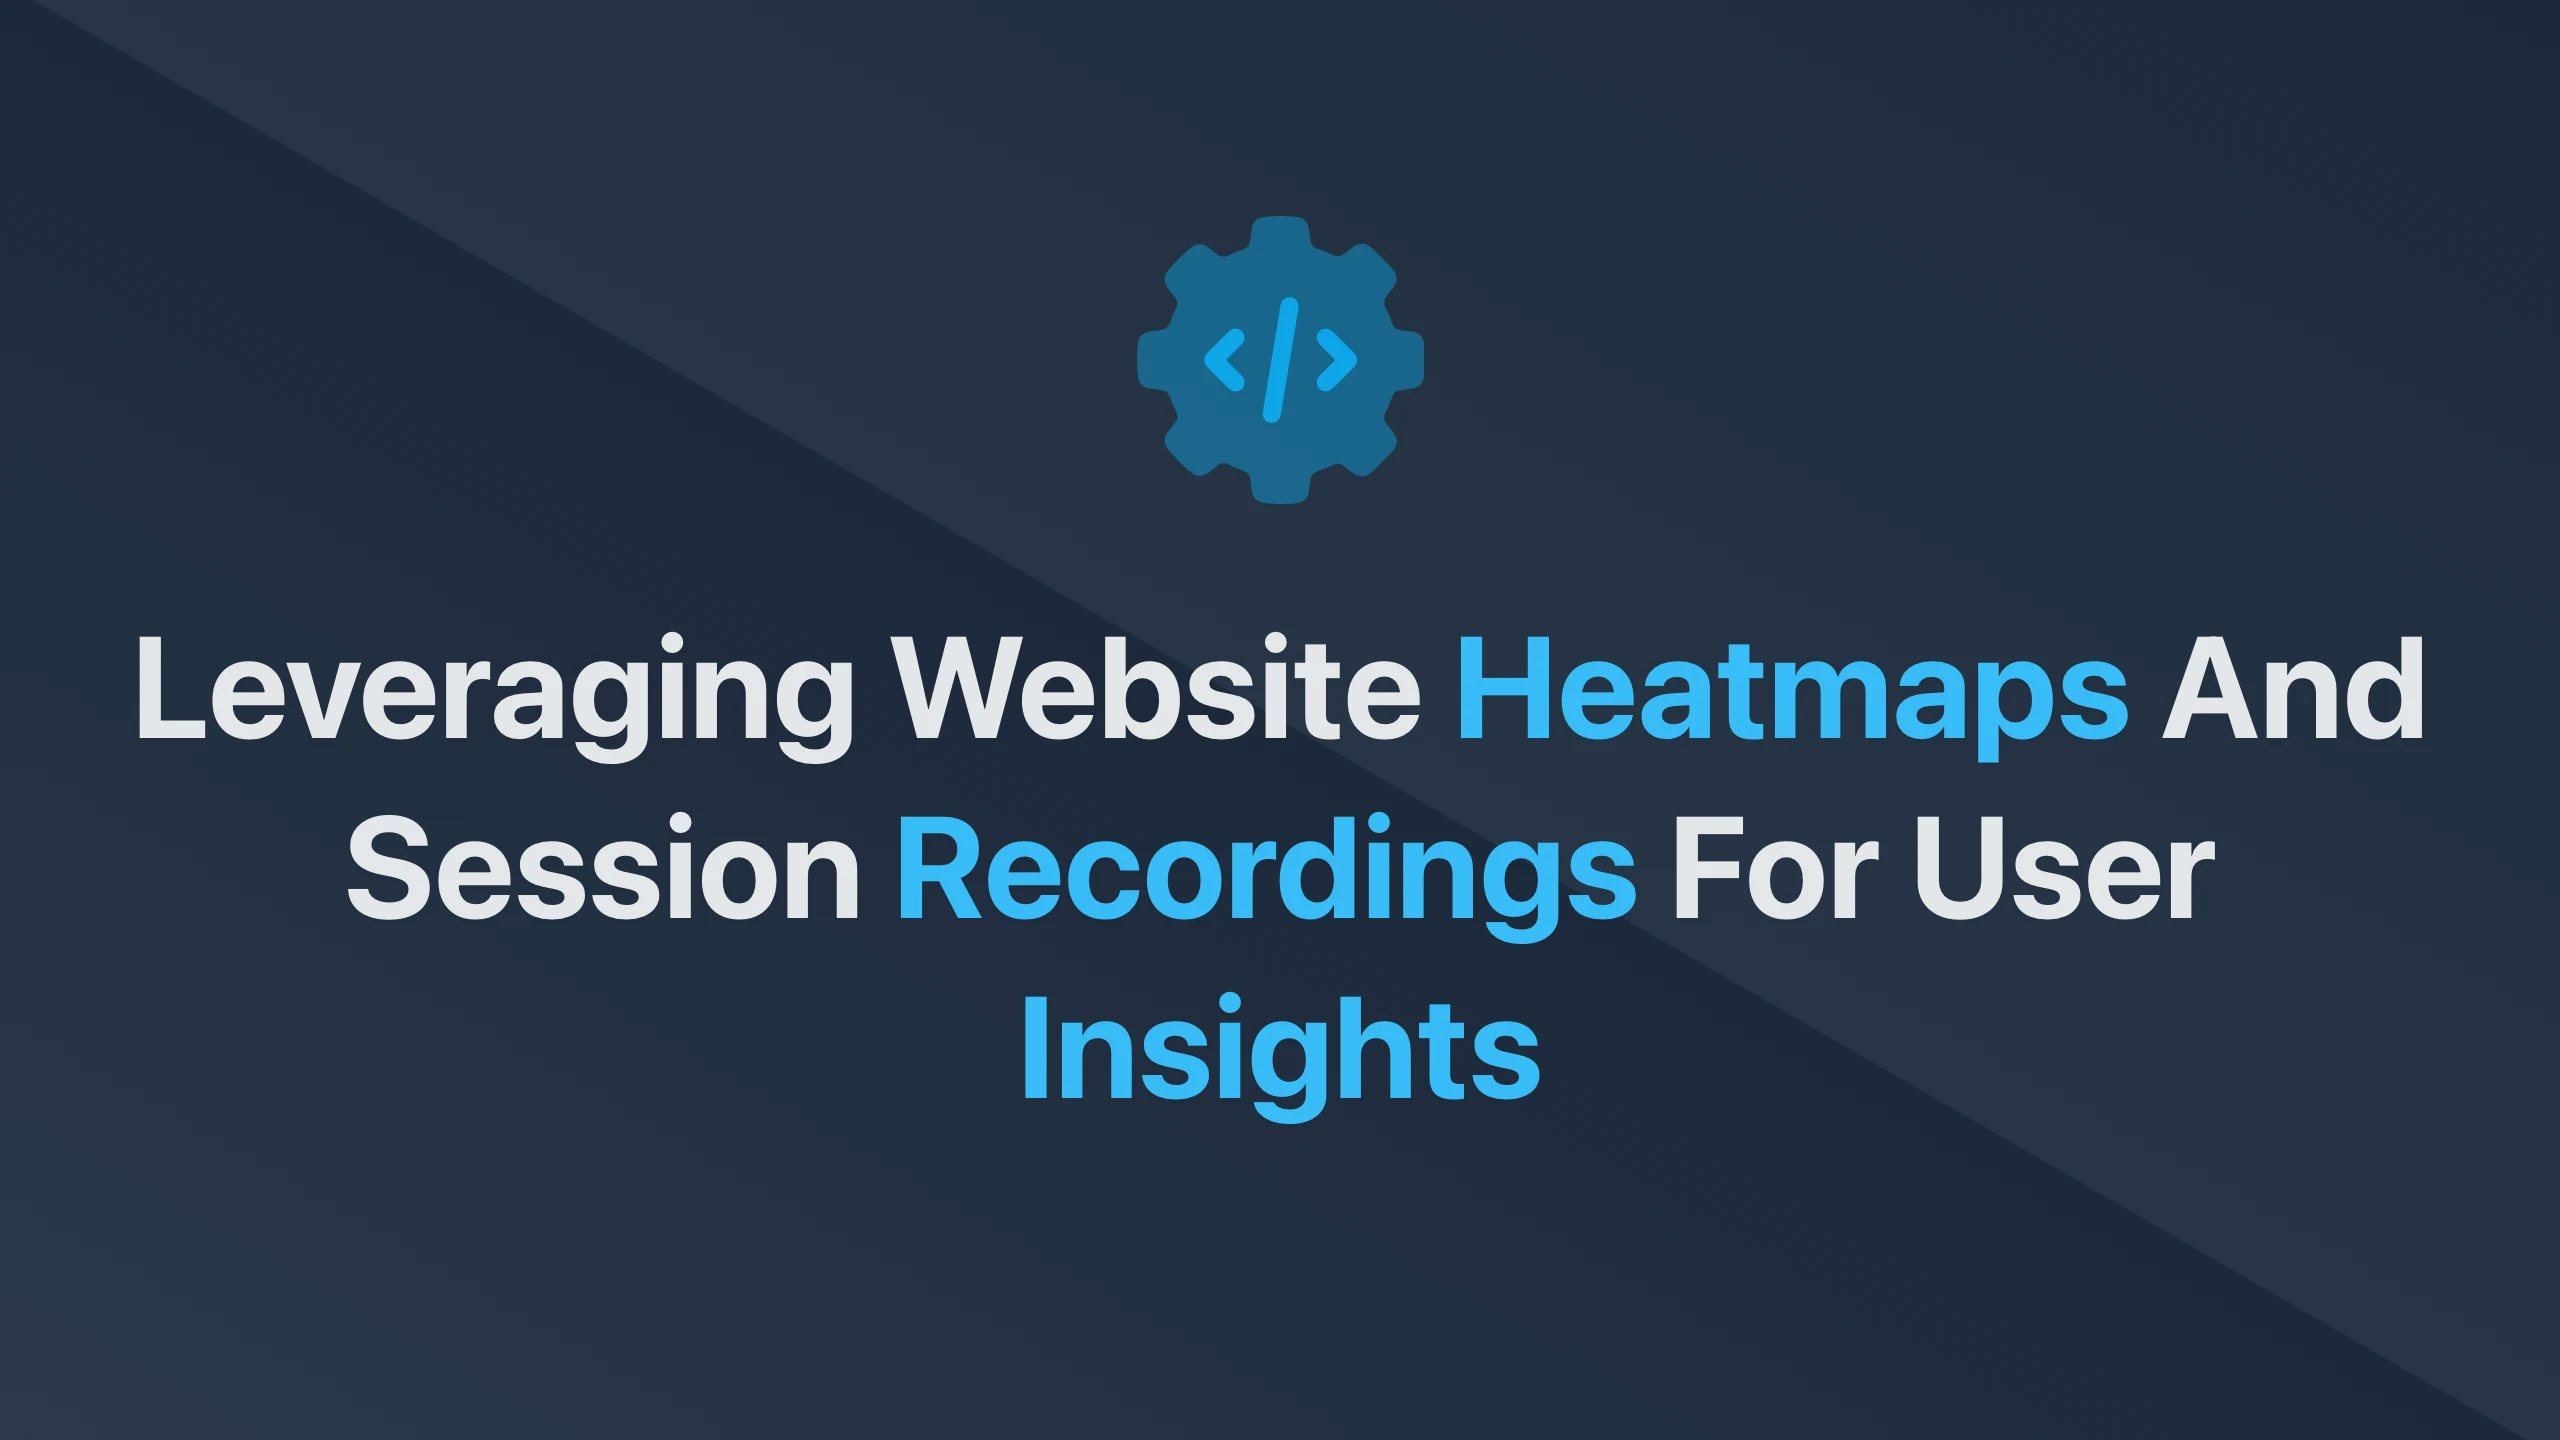 Cover Image for Leveraging Website Heatmaps and Session Recordings for User Insights